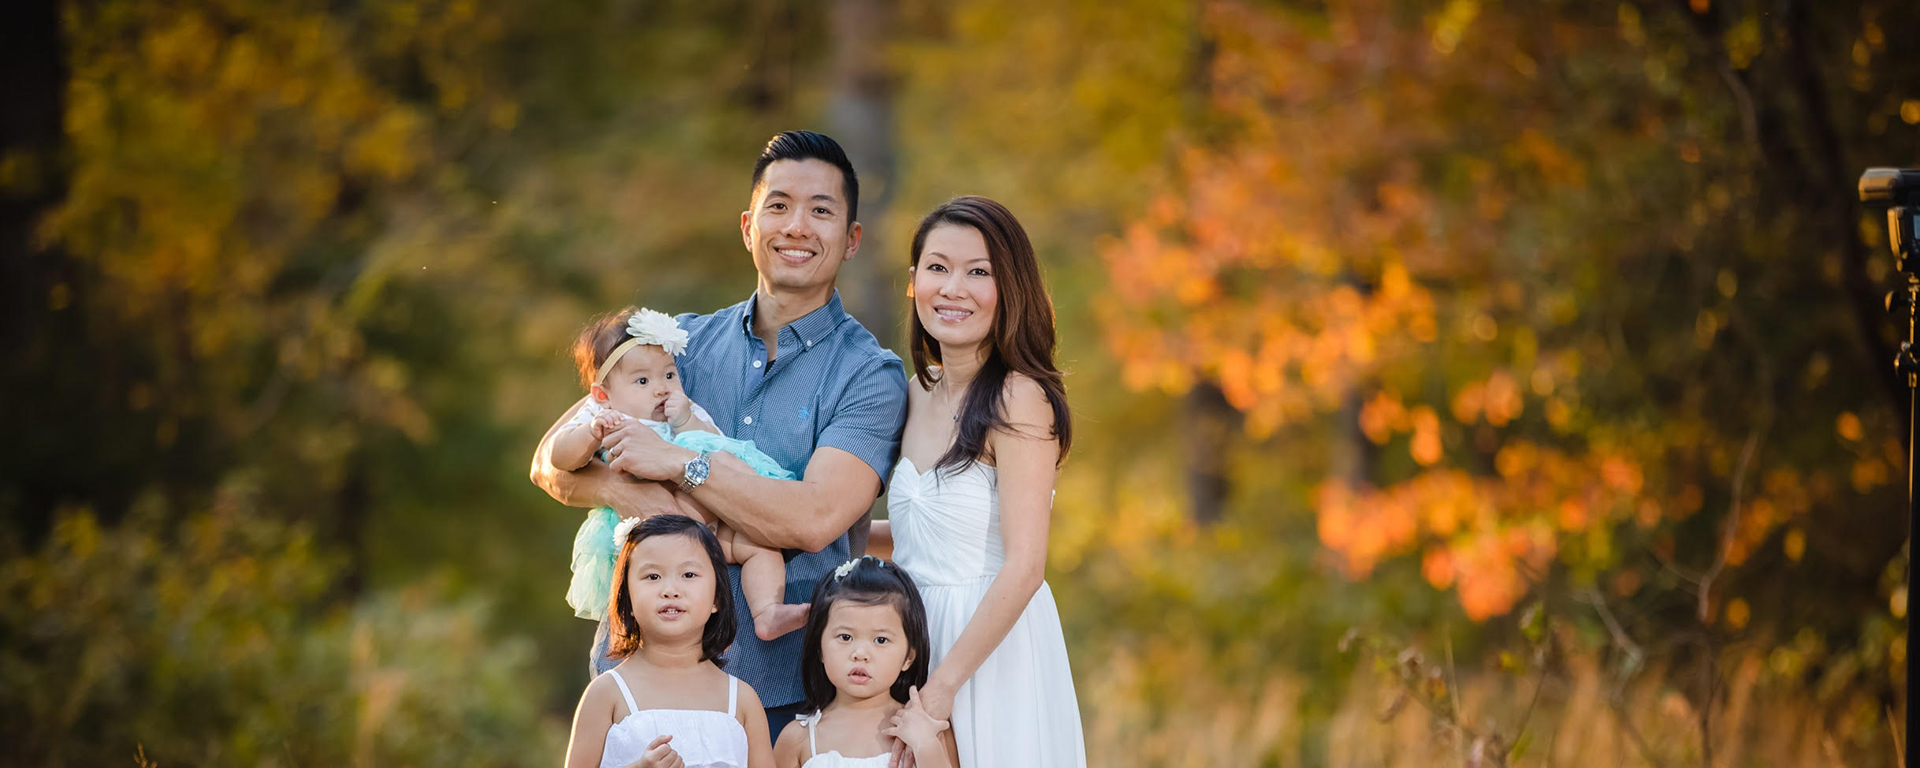 Capital One associate, immigrant and son to two heroic Vietnamese refugees talks about harmony of his work-life balance at Capital One